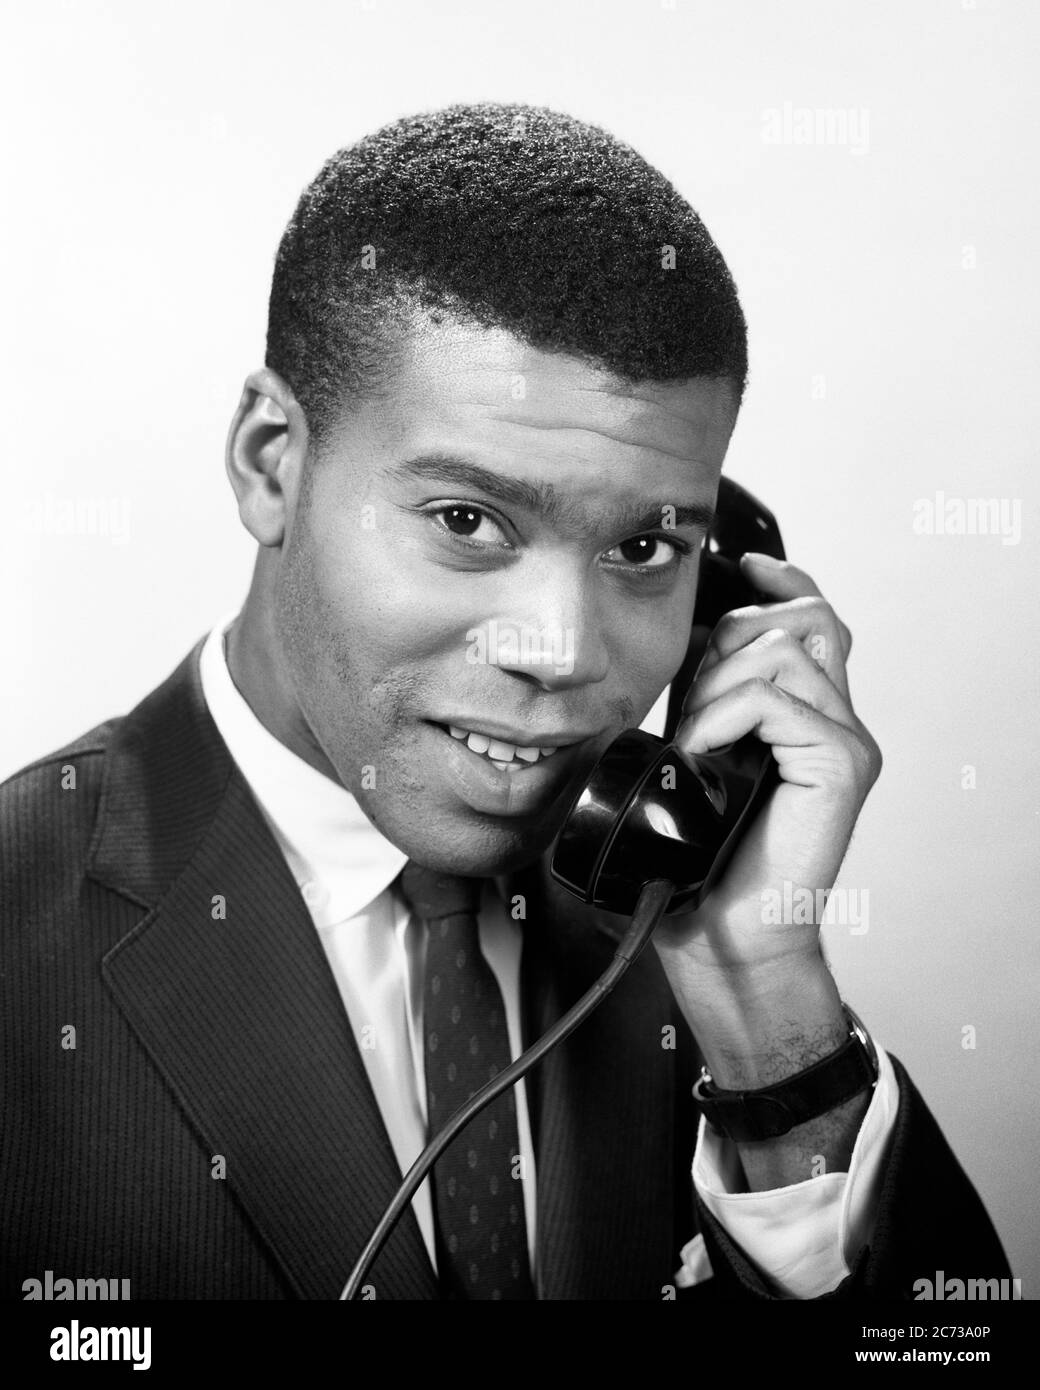 1950s 1960s SERIOUS SMILING AFRICAN AMERICAN MAN BUSINESSMAN WEARING SUIT AND TIE LOOKING AT CAMERA TALKING ON TELEPHONE  - n248 HAR001 HARS JOY LIFESTYLE HEALTHINESS HALF-LENGTH PERSONS MALES CONFIDENCE EXPRESSIONS B&W EYE CONTACT GOALS SUCCESS SUIT AND TIE DREAMS SELLING HAPPINESS HEAD AND SHOULDERS CHEERFUL CUSTOMER SERVICE AFRICAN-AMERICANS COURAGE AFRICAN-AMERICAN AND CHOICE KNOWLEDGE LEADERSHIP PROGRESS RECREATION BLACK ETHNICITY PRIDE IN ON OCCUPATIONS POLITICS SMILES CONNECTION CONCEPTUAL JOYFUL STYLISH COOPERATION GROWTH SALESMEN WEARING  YOUNG ADULT MAN BLACK AND WHITE HAR001 Stock Photo